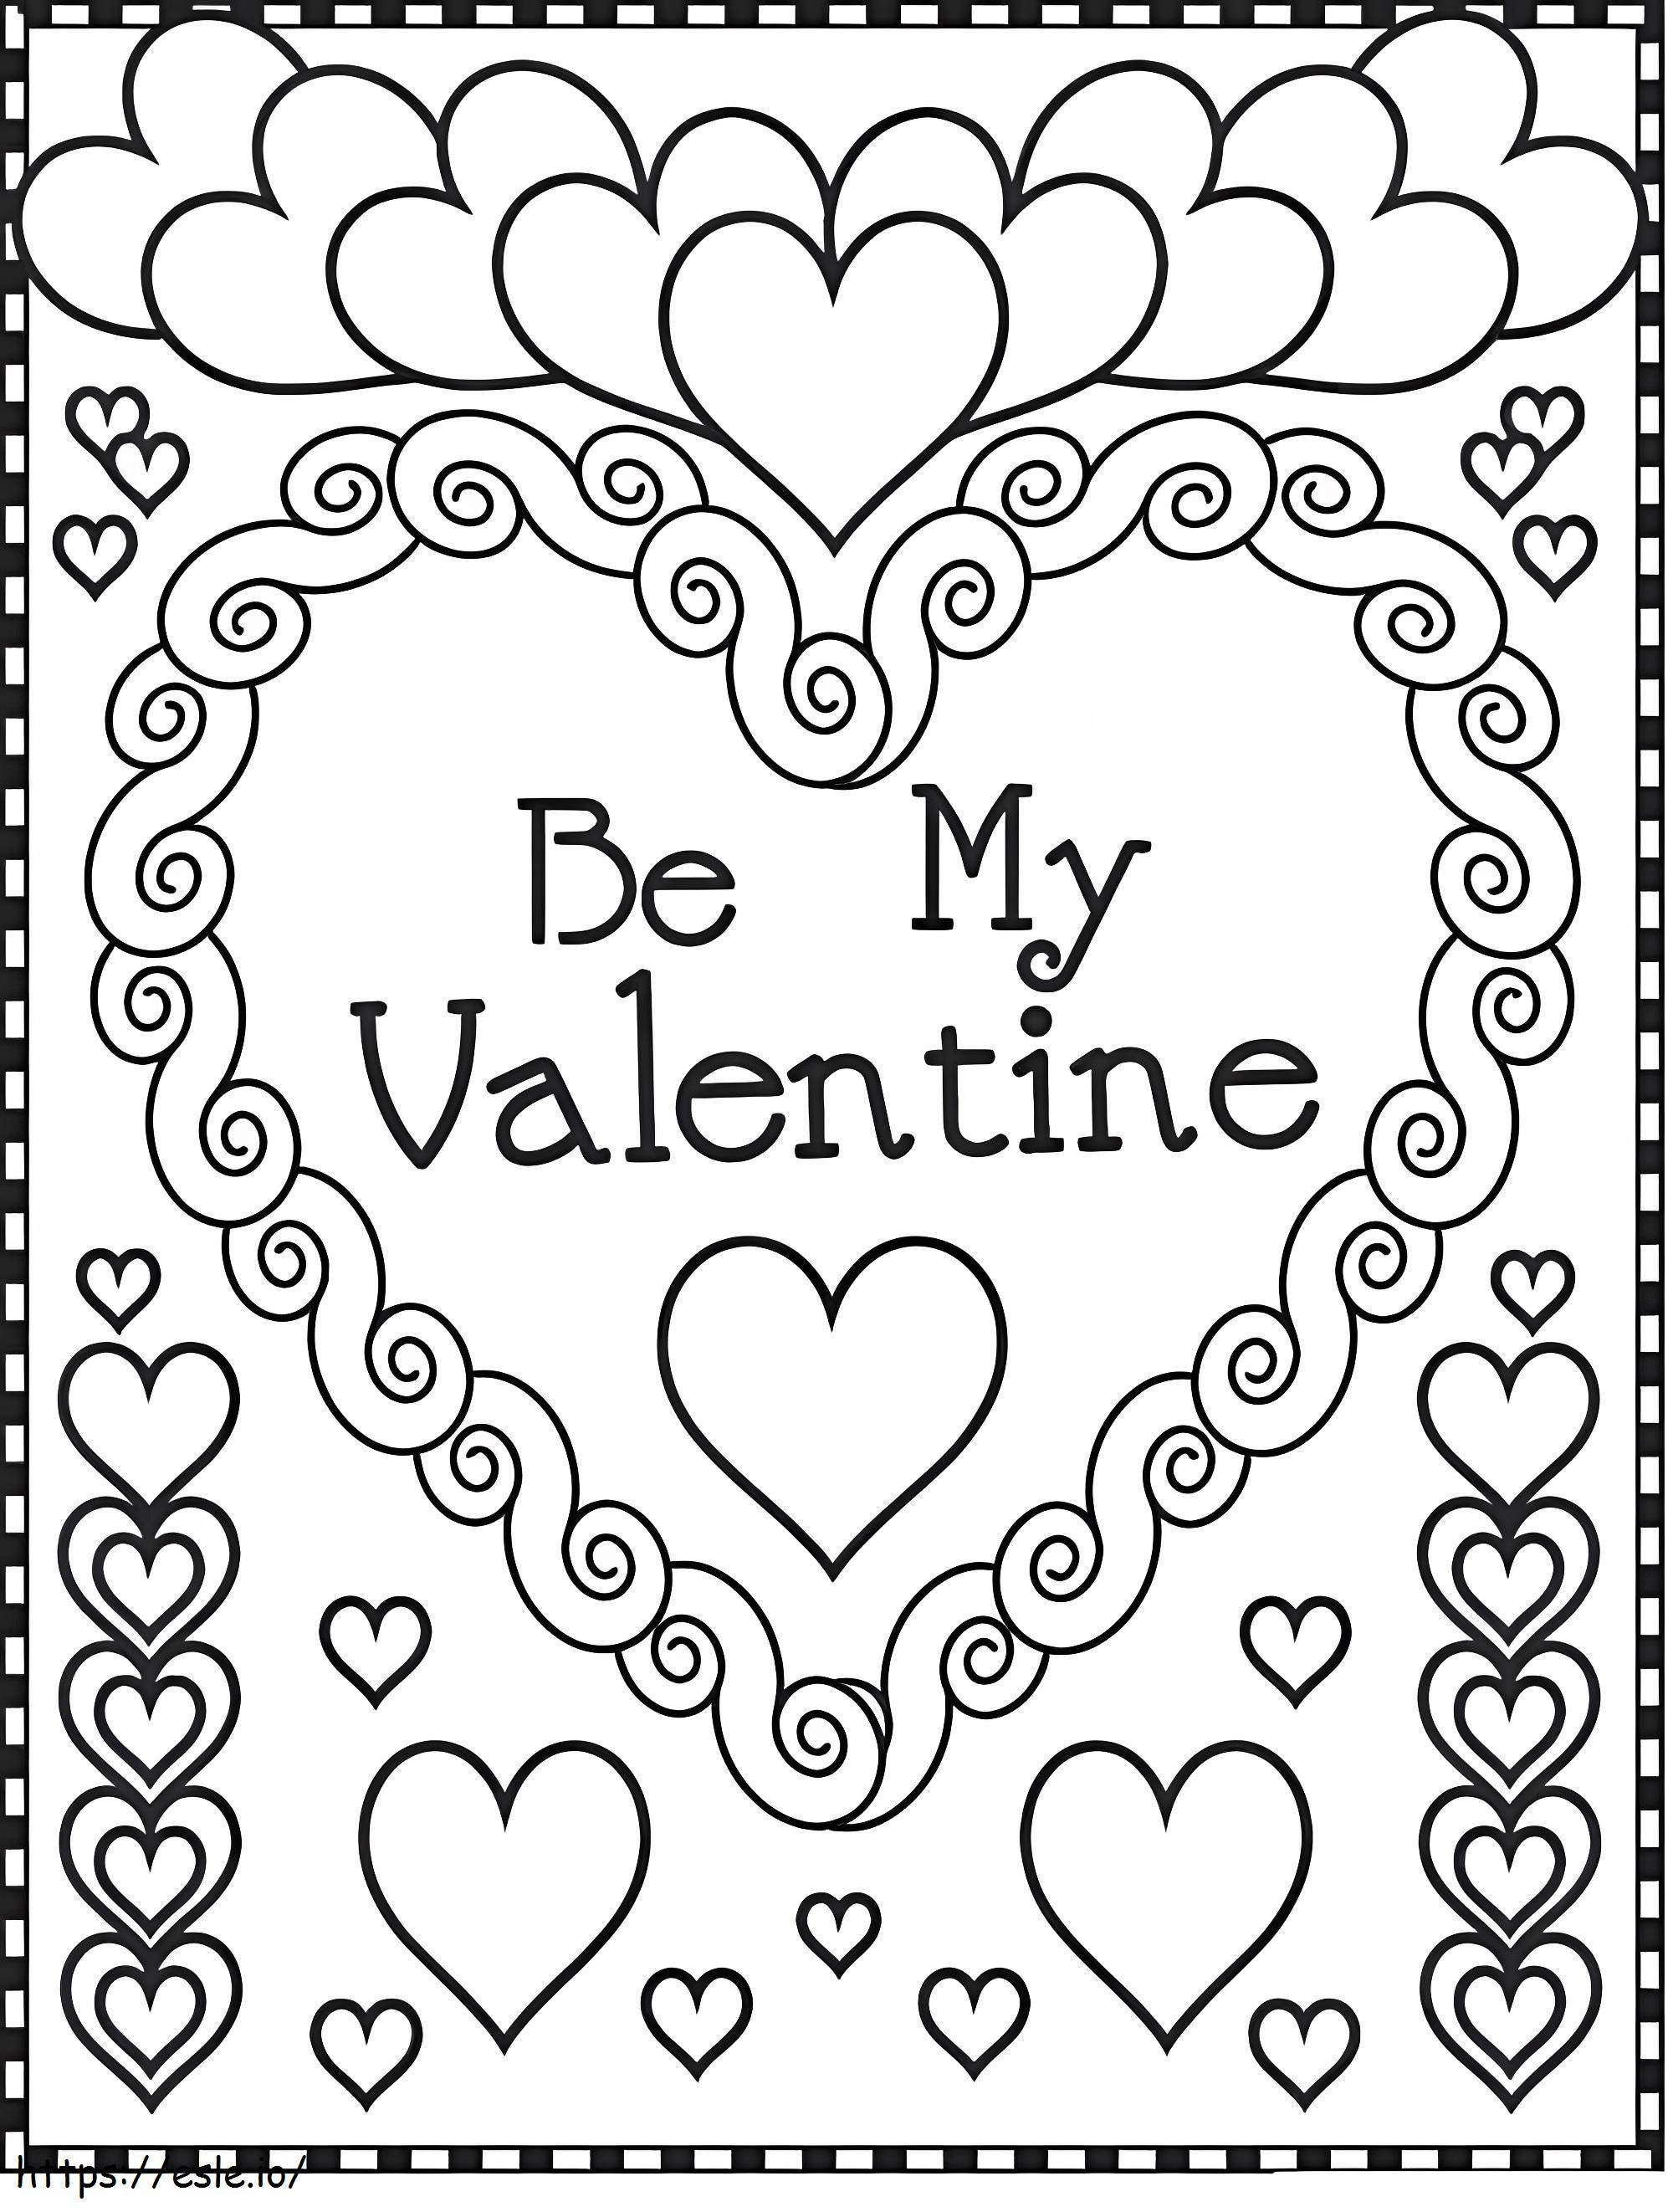 Be Mine Valentine Heart Card coloring page